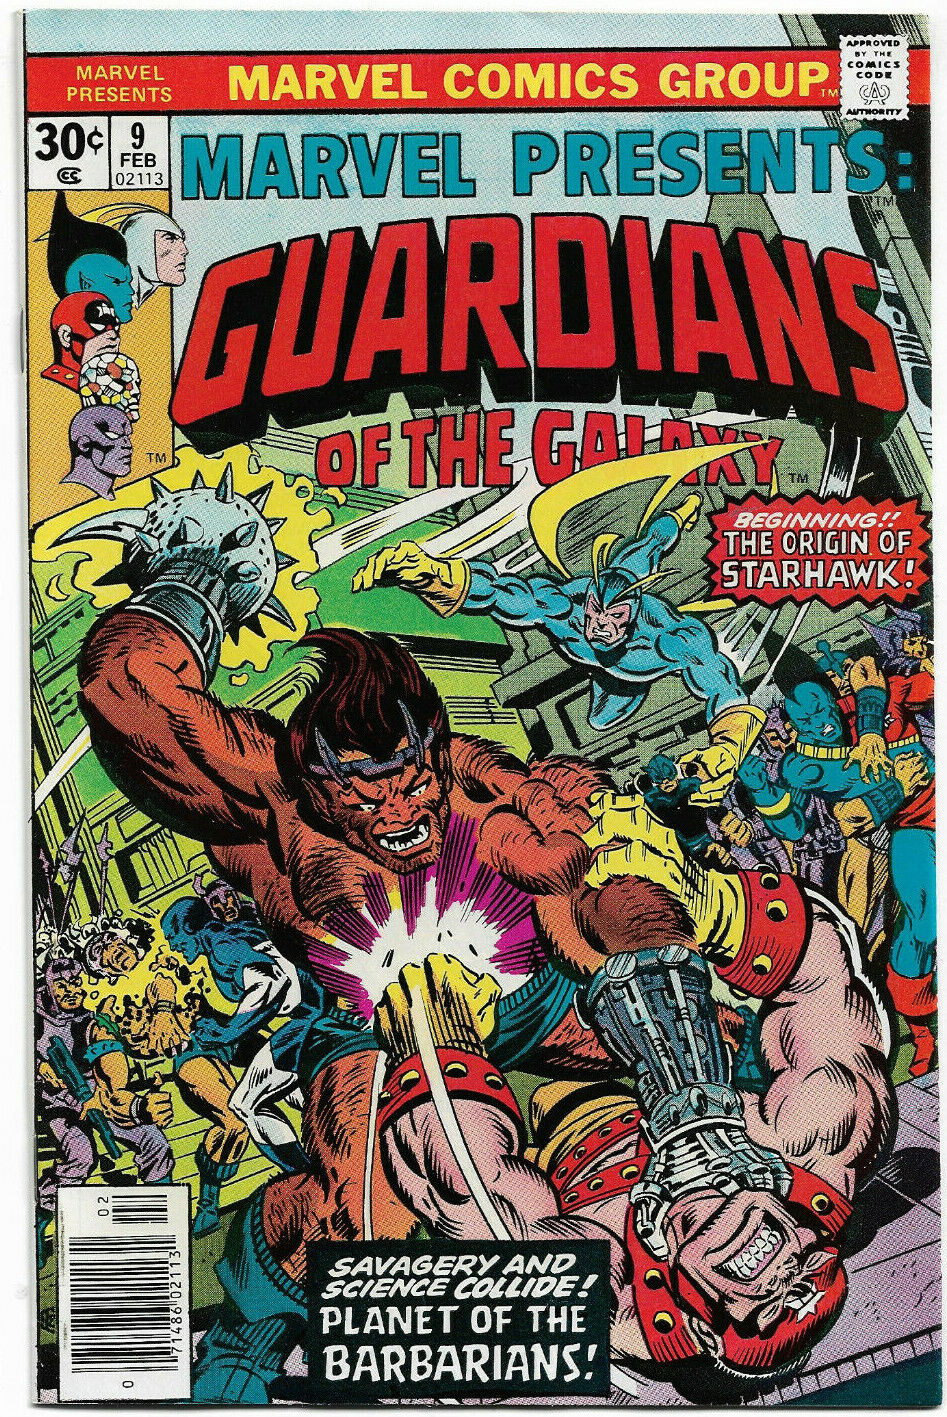 MARVEL PRESENTS#9 VF/NM 1977 GUARDIANS OF THE GALAXY BRONZE AGE COMICS